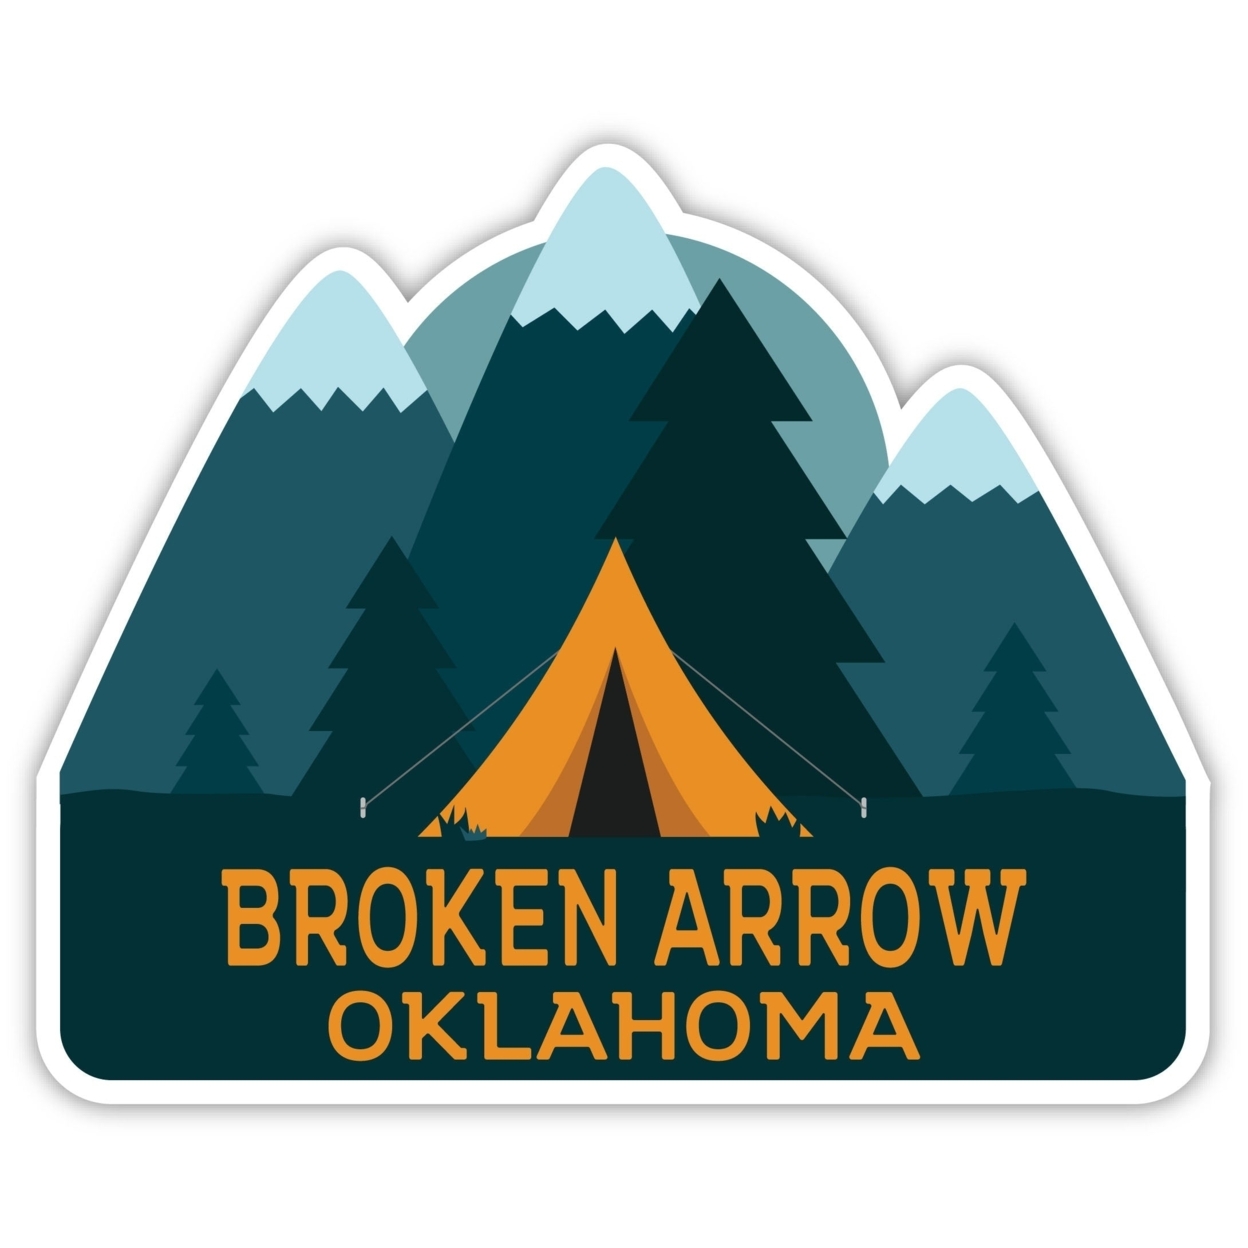 Broken Arrow Oklahoma Souvenir Decorative Stickers (Choose Theme And Size) - 4-Pack, 6-Inch, Tent